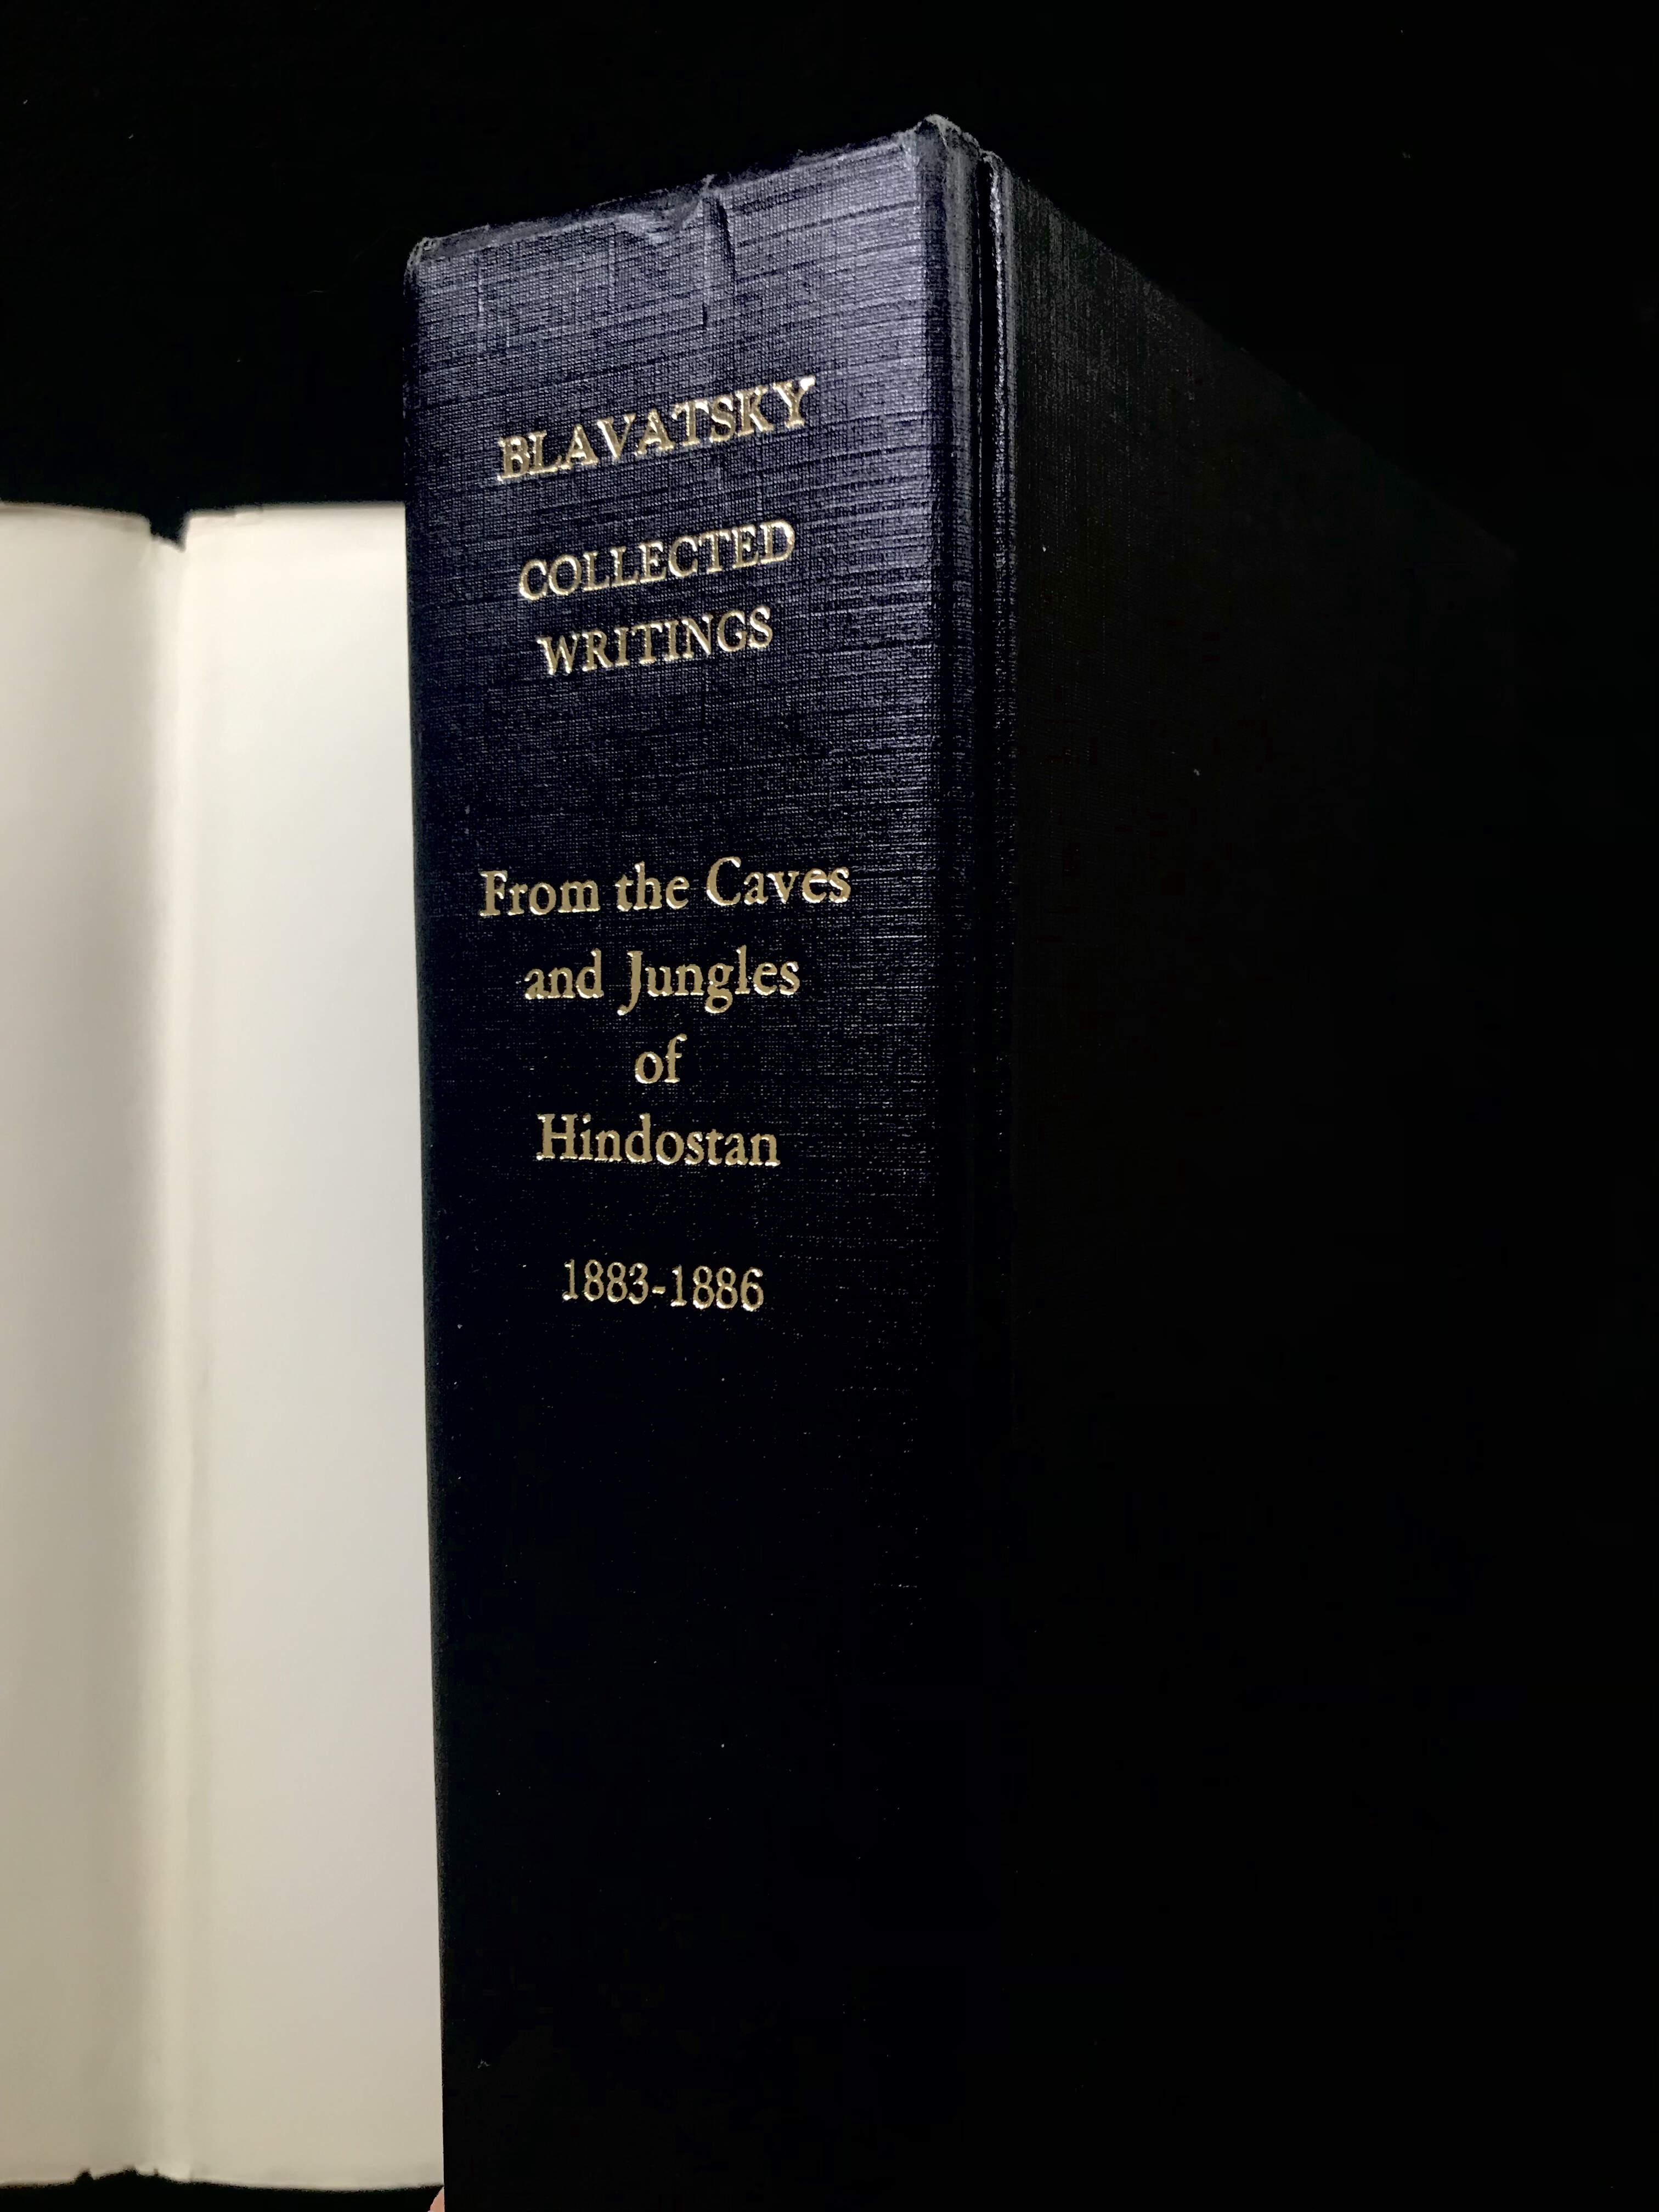 From The Caves And Jungles of Hindostan : H. P Blavatsky Collected Writings